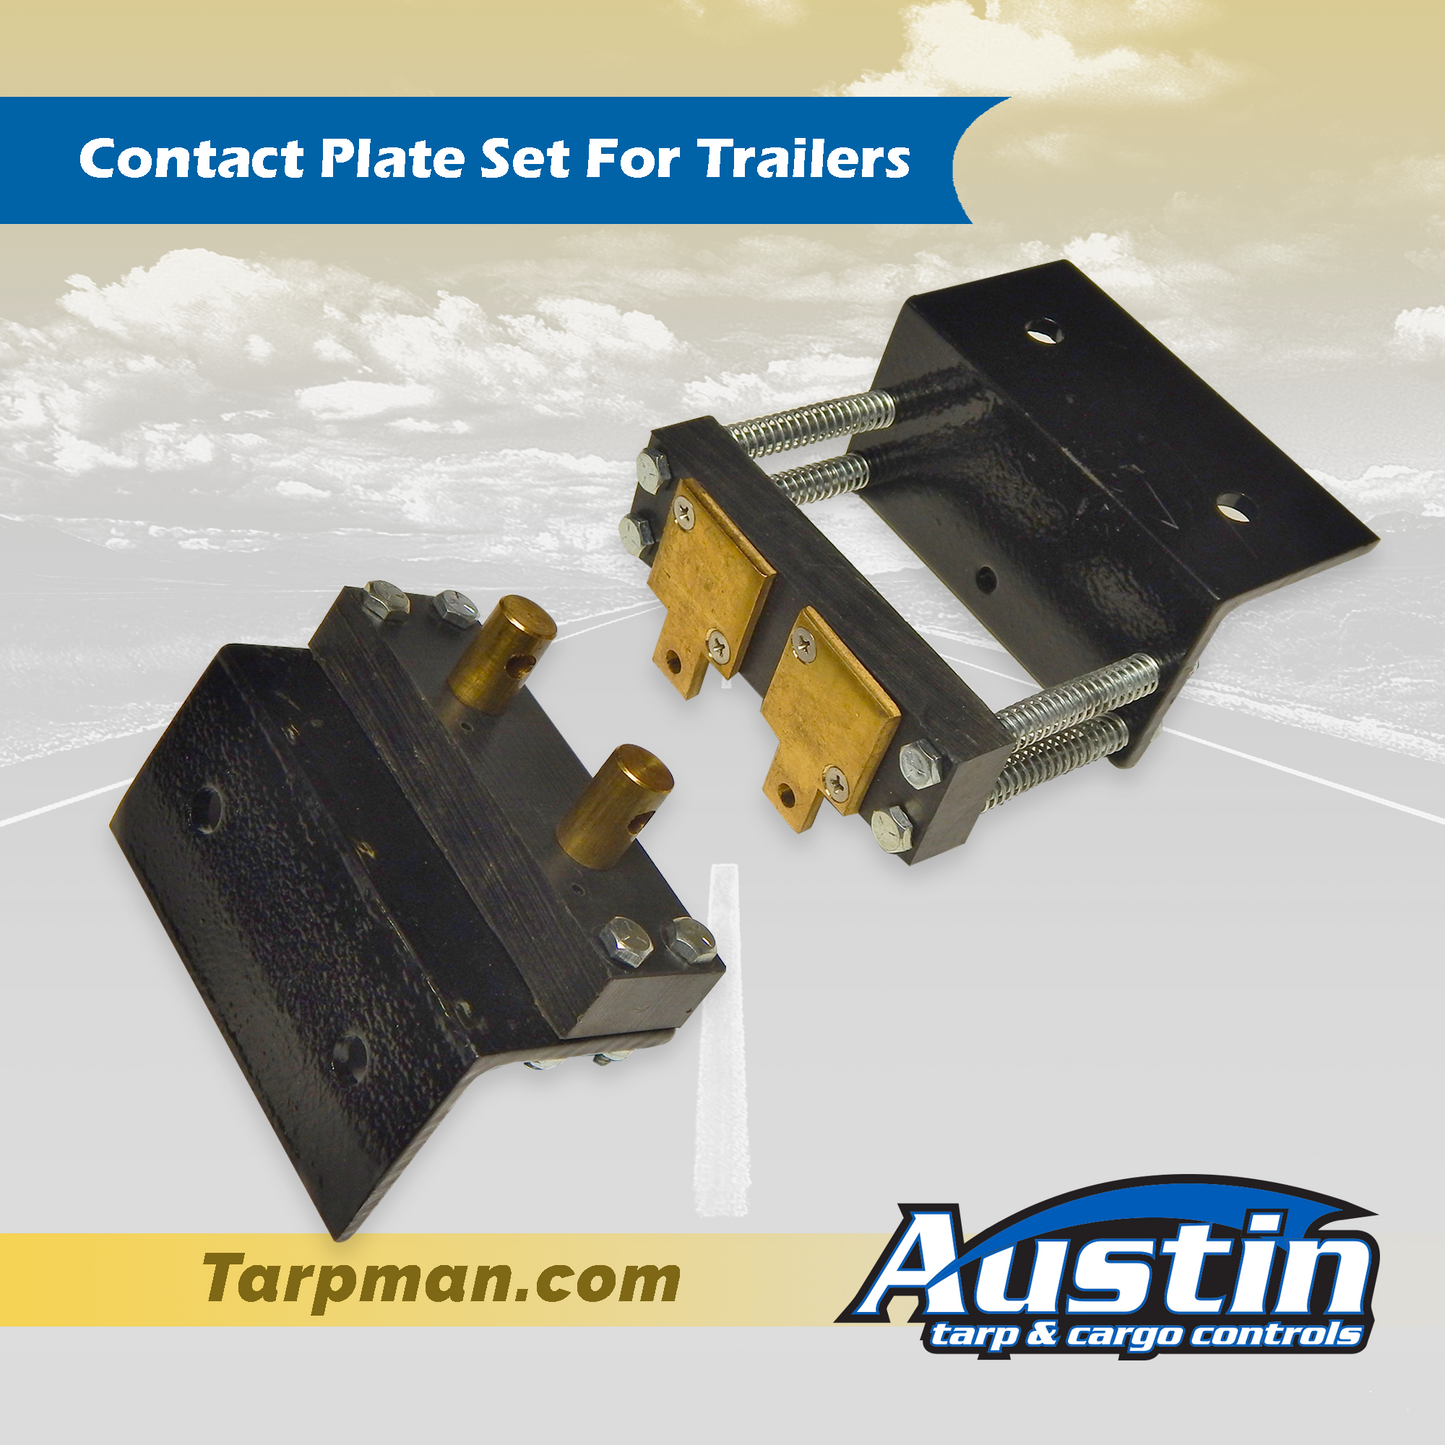 Contact Plate set for trailers